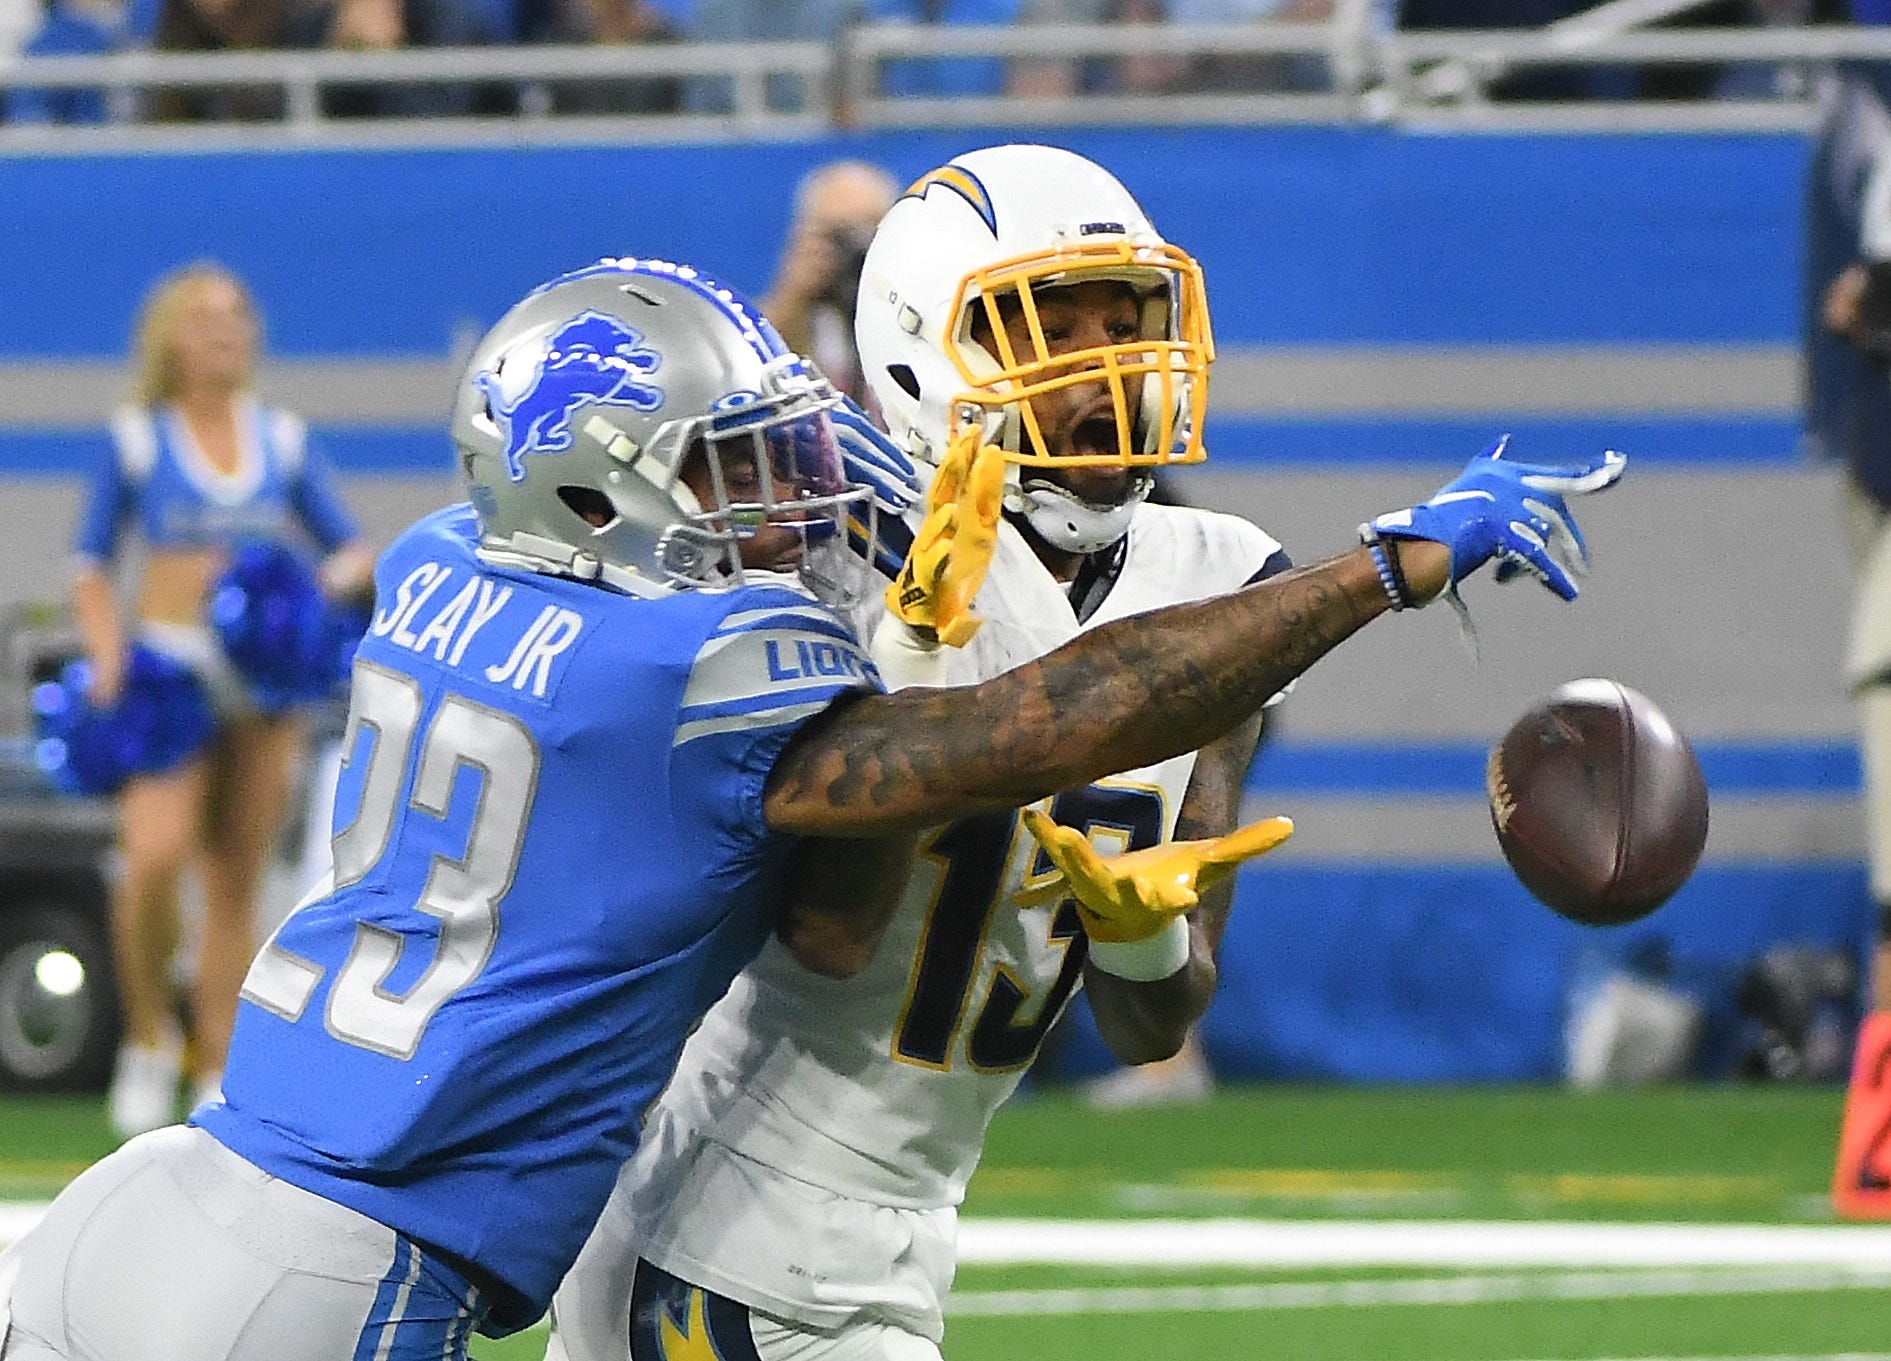 Darius Slay, cornerback: The Lions ask so much of Slay, having him follow around the opponent’s best receiver week after week. Still, the coverage numbers were above-average, with only 58.3 percent of the throws his direction resulting in completions with a respectable 13 pass breakups. Slay's effort in run support was less than desirable, but not all that uncommon for the position. Grade: B+